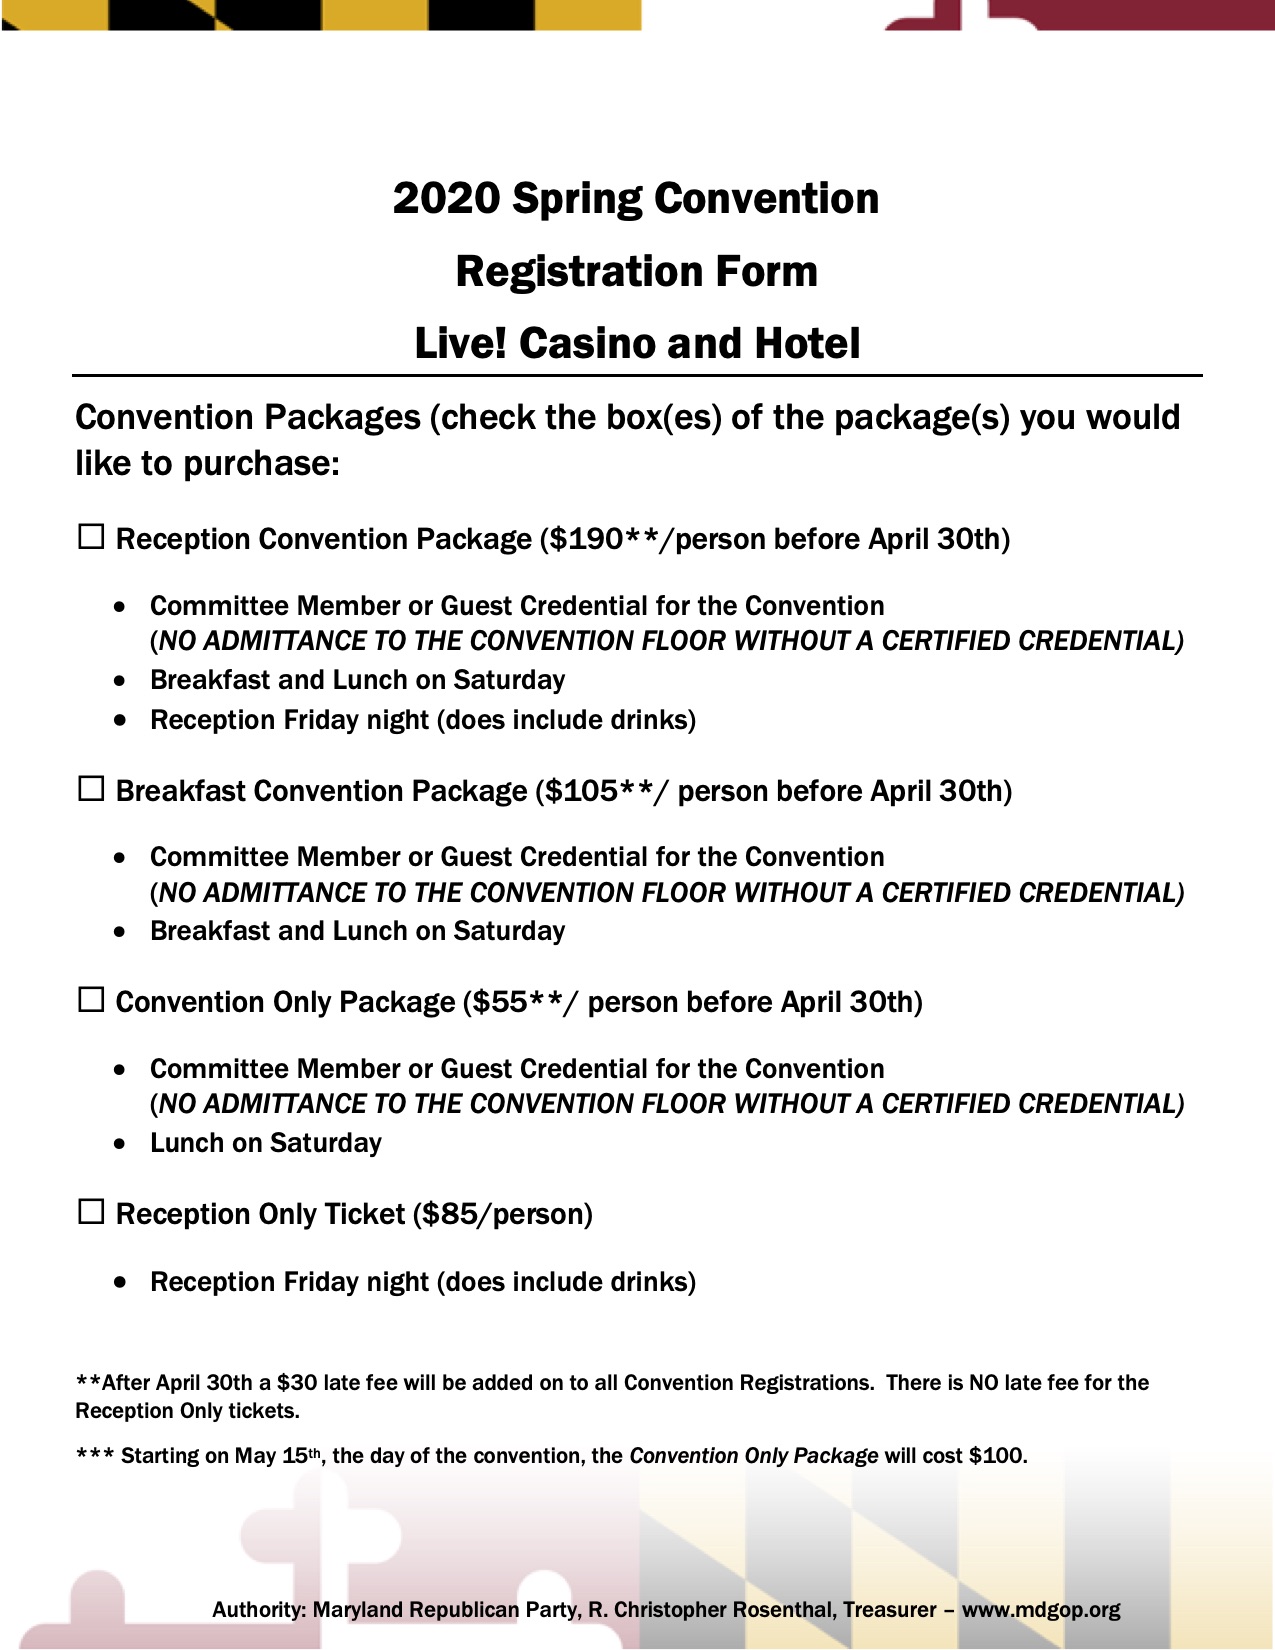 2020 Spring Convention Packet pg6